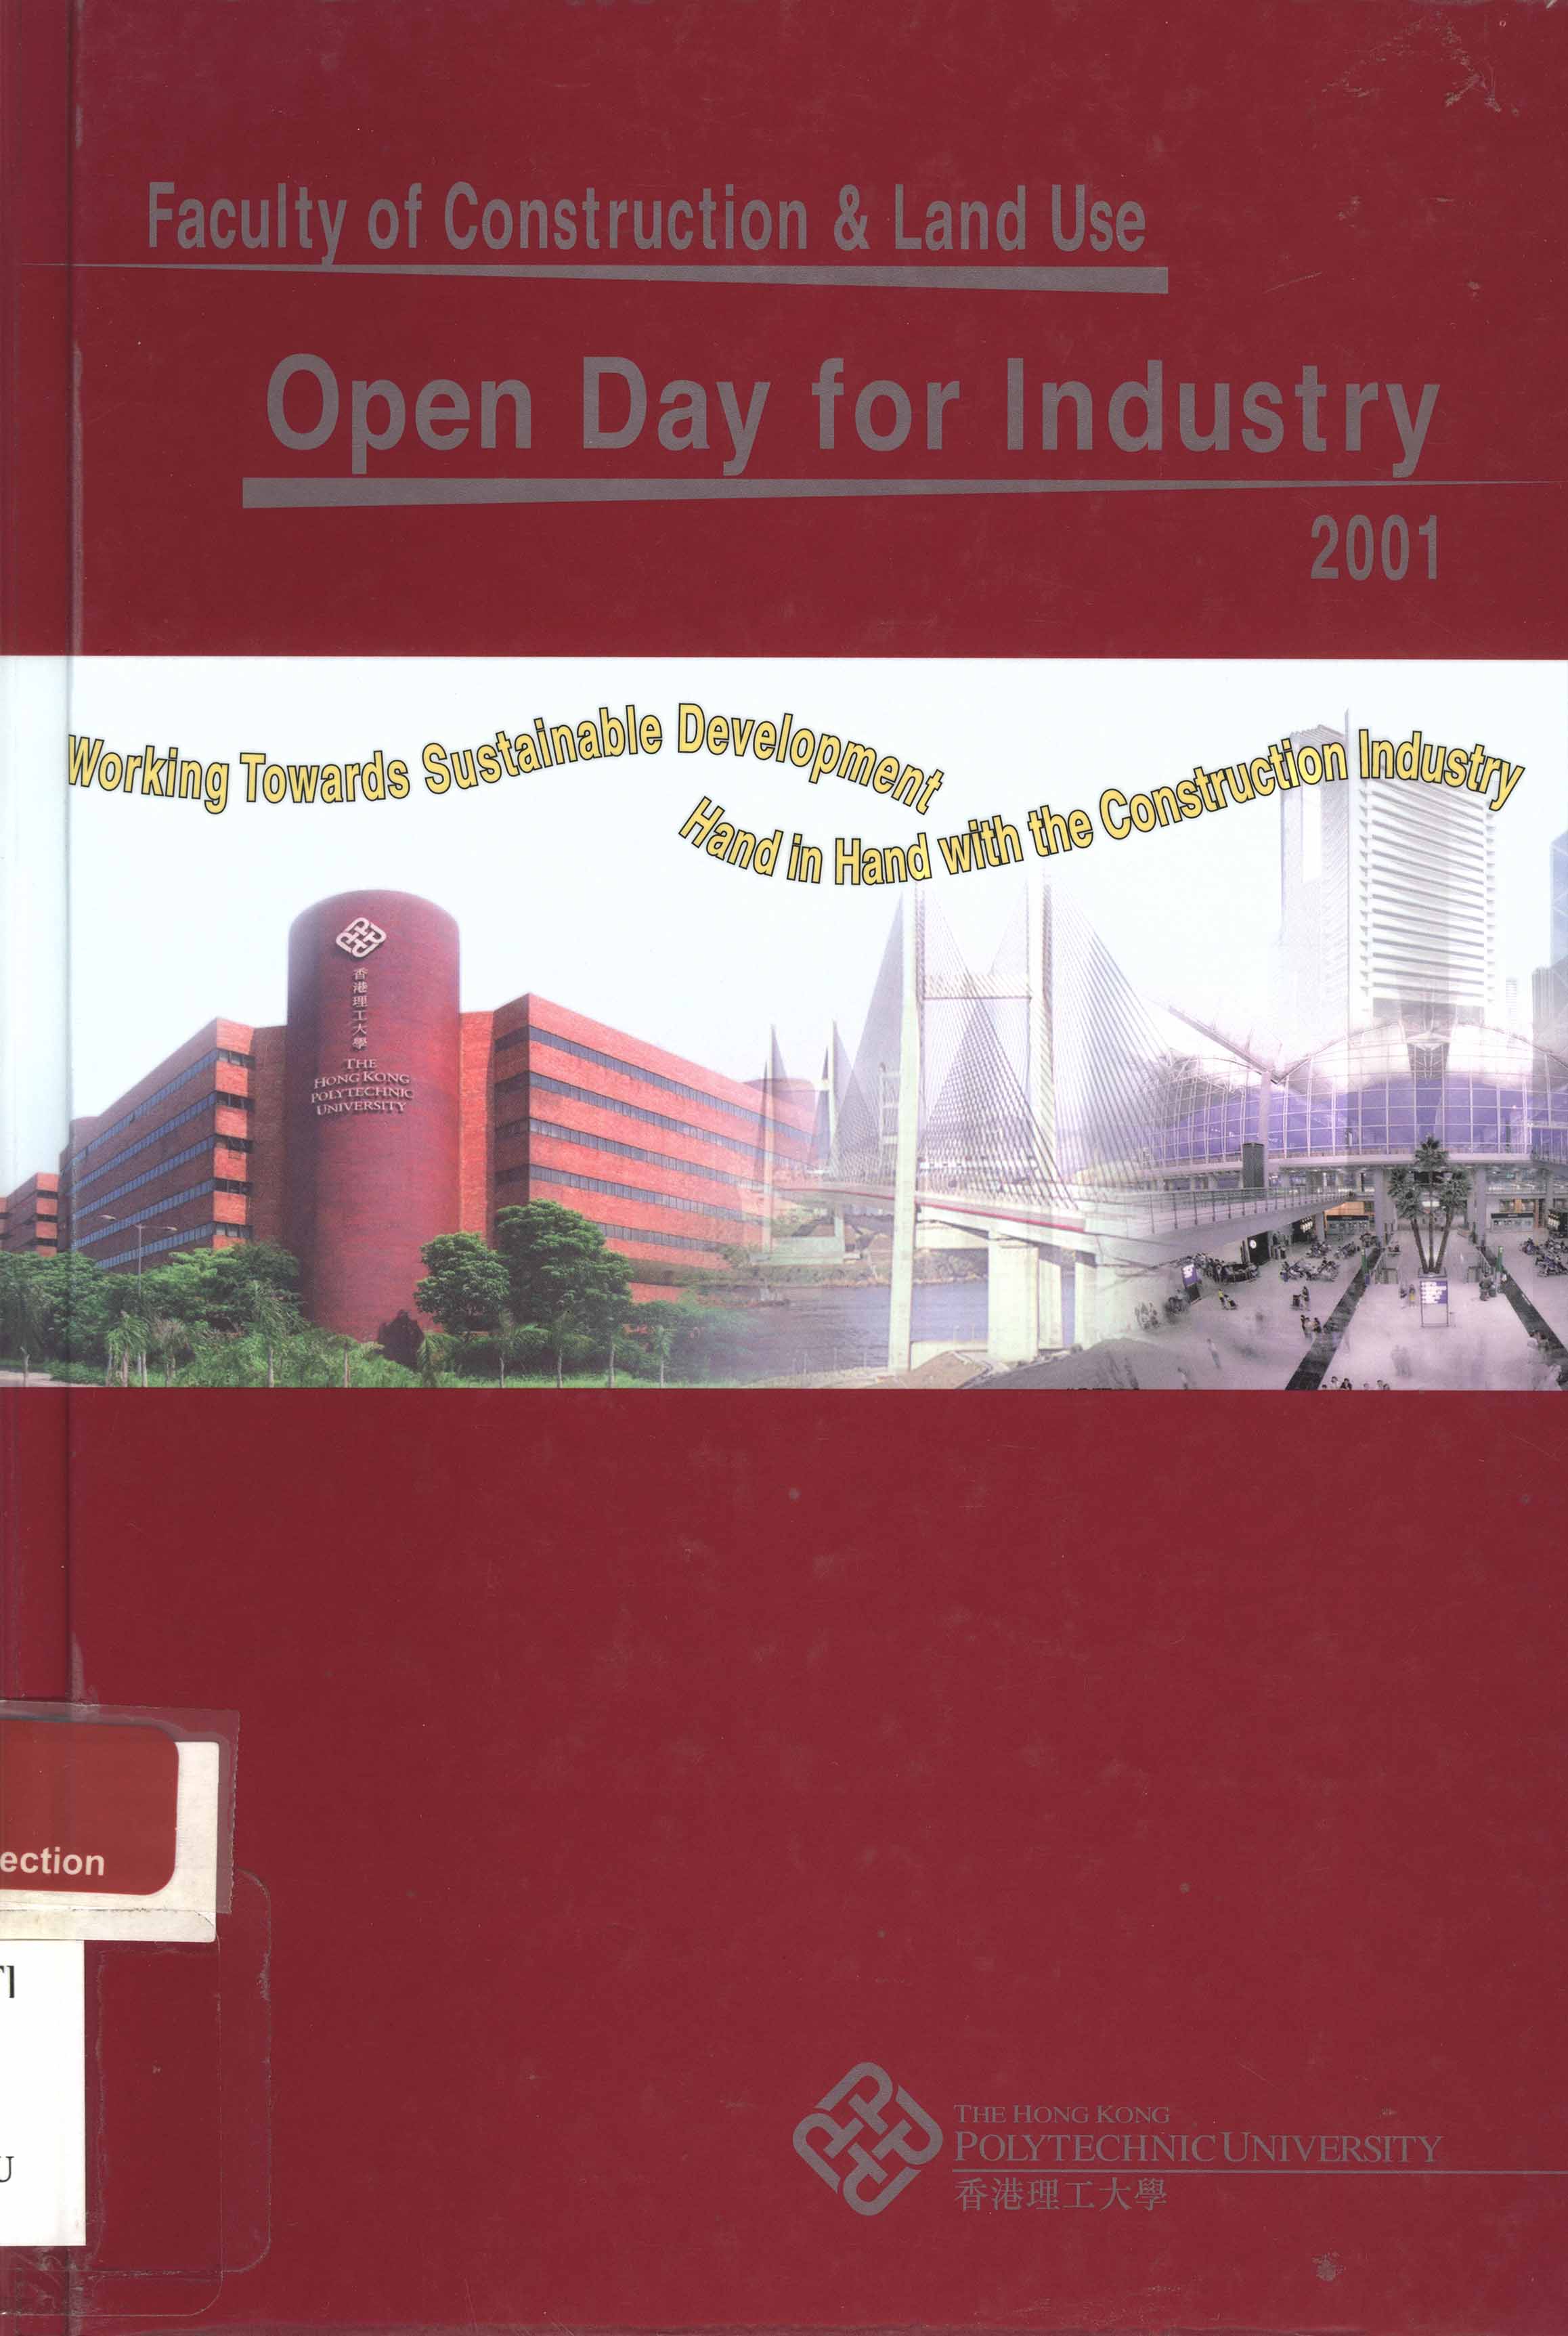 Faculty of Construction & Land Use : open day for industry 2001